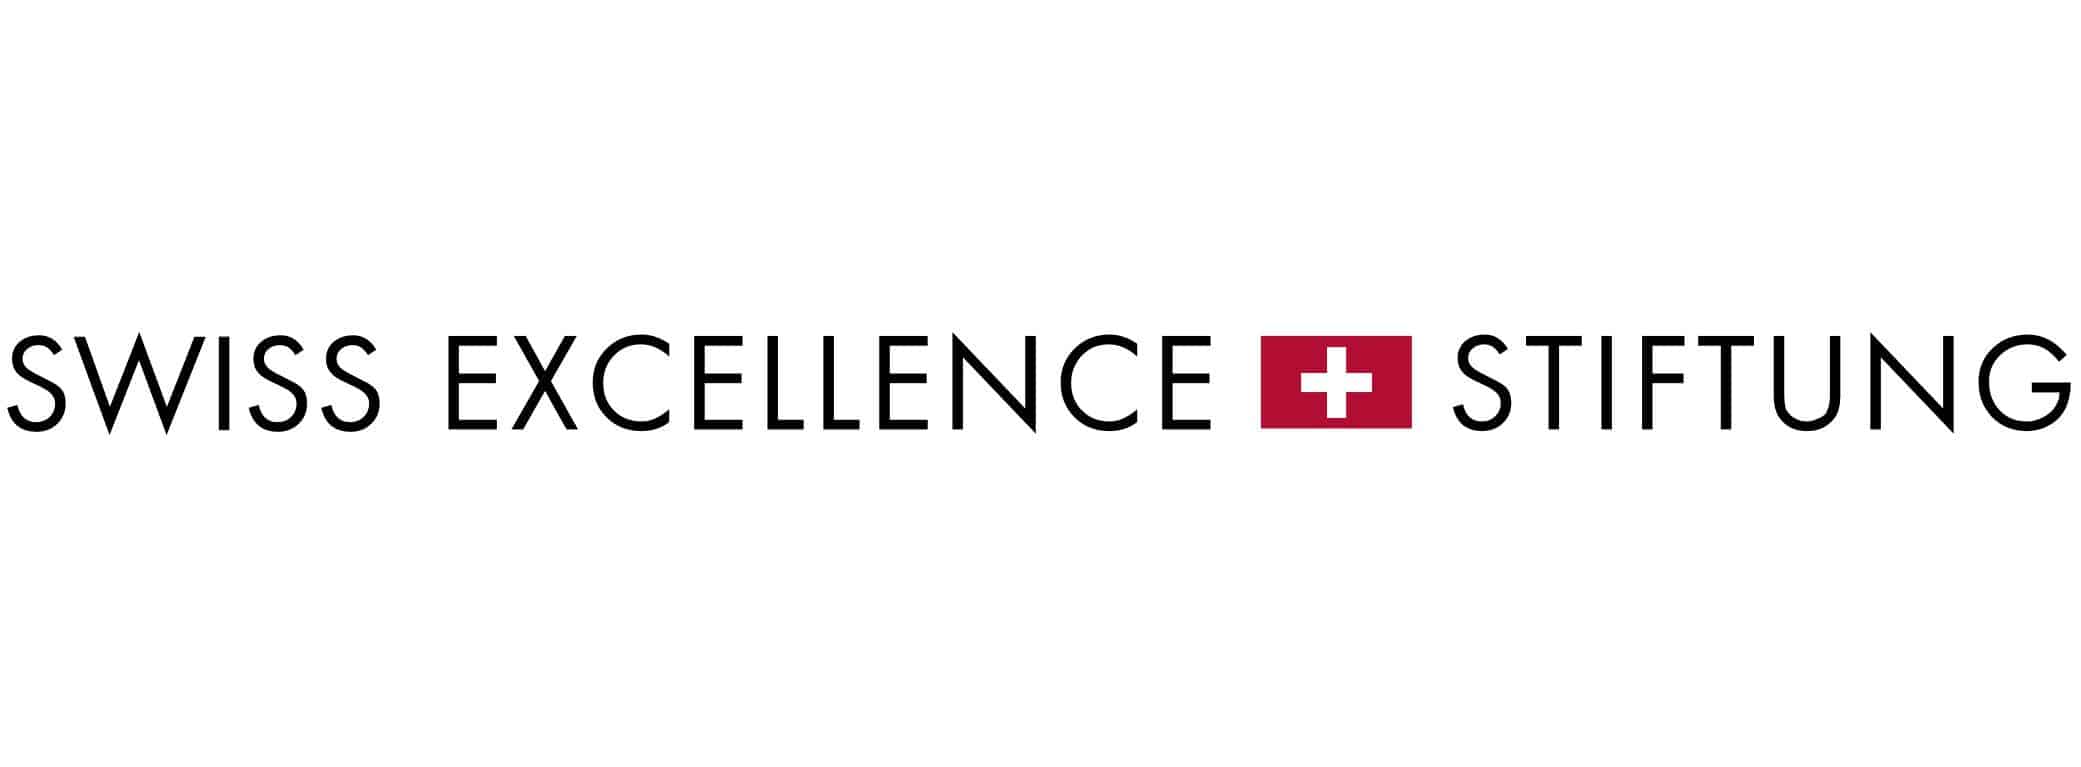 Swiss-excellence